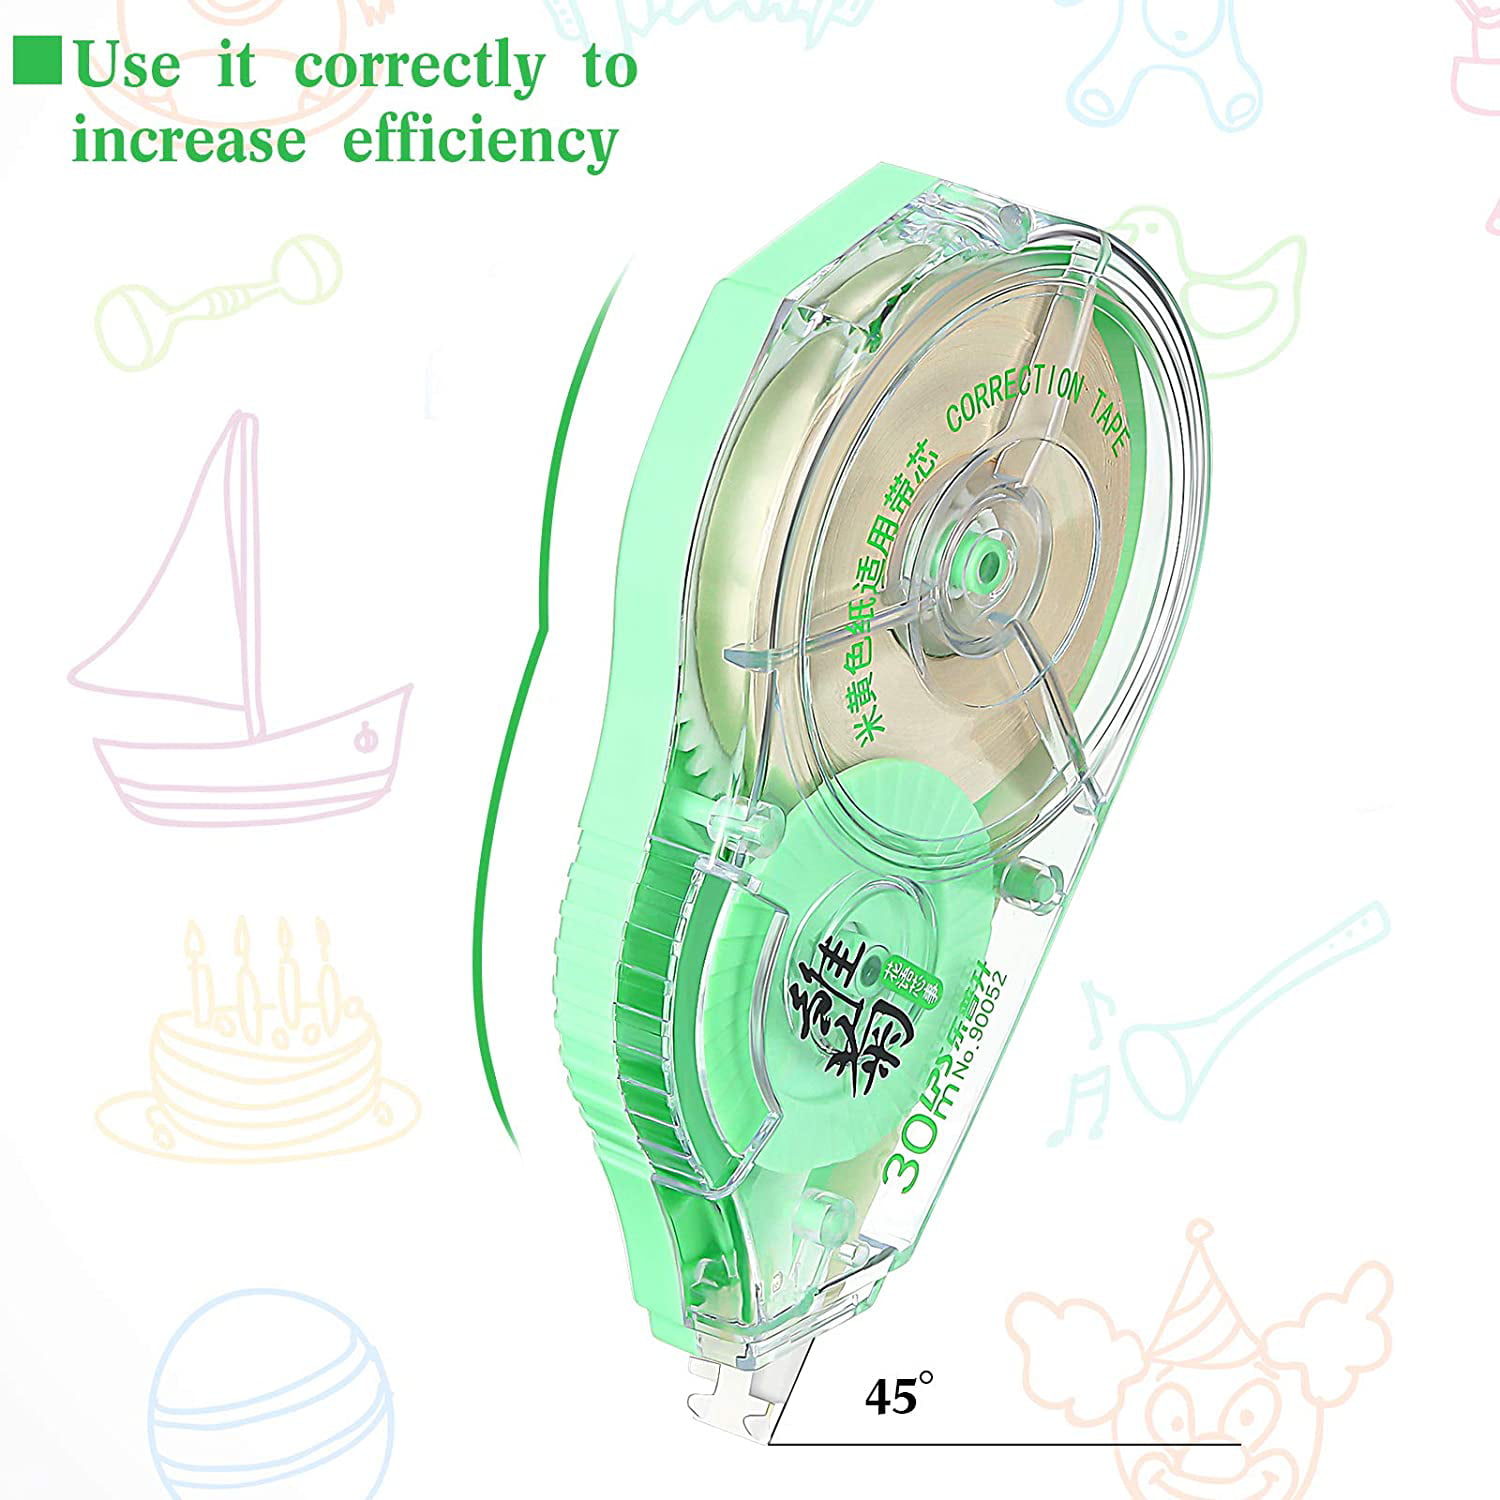 Office Administration Note Taking Crafting 4 Pieces Correction Tape Cream Color Corrective Tape Correction Tape Refillable 100 Feet Long for School Bullet Journal Random Color 